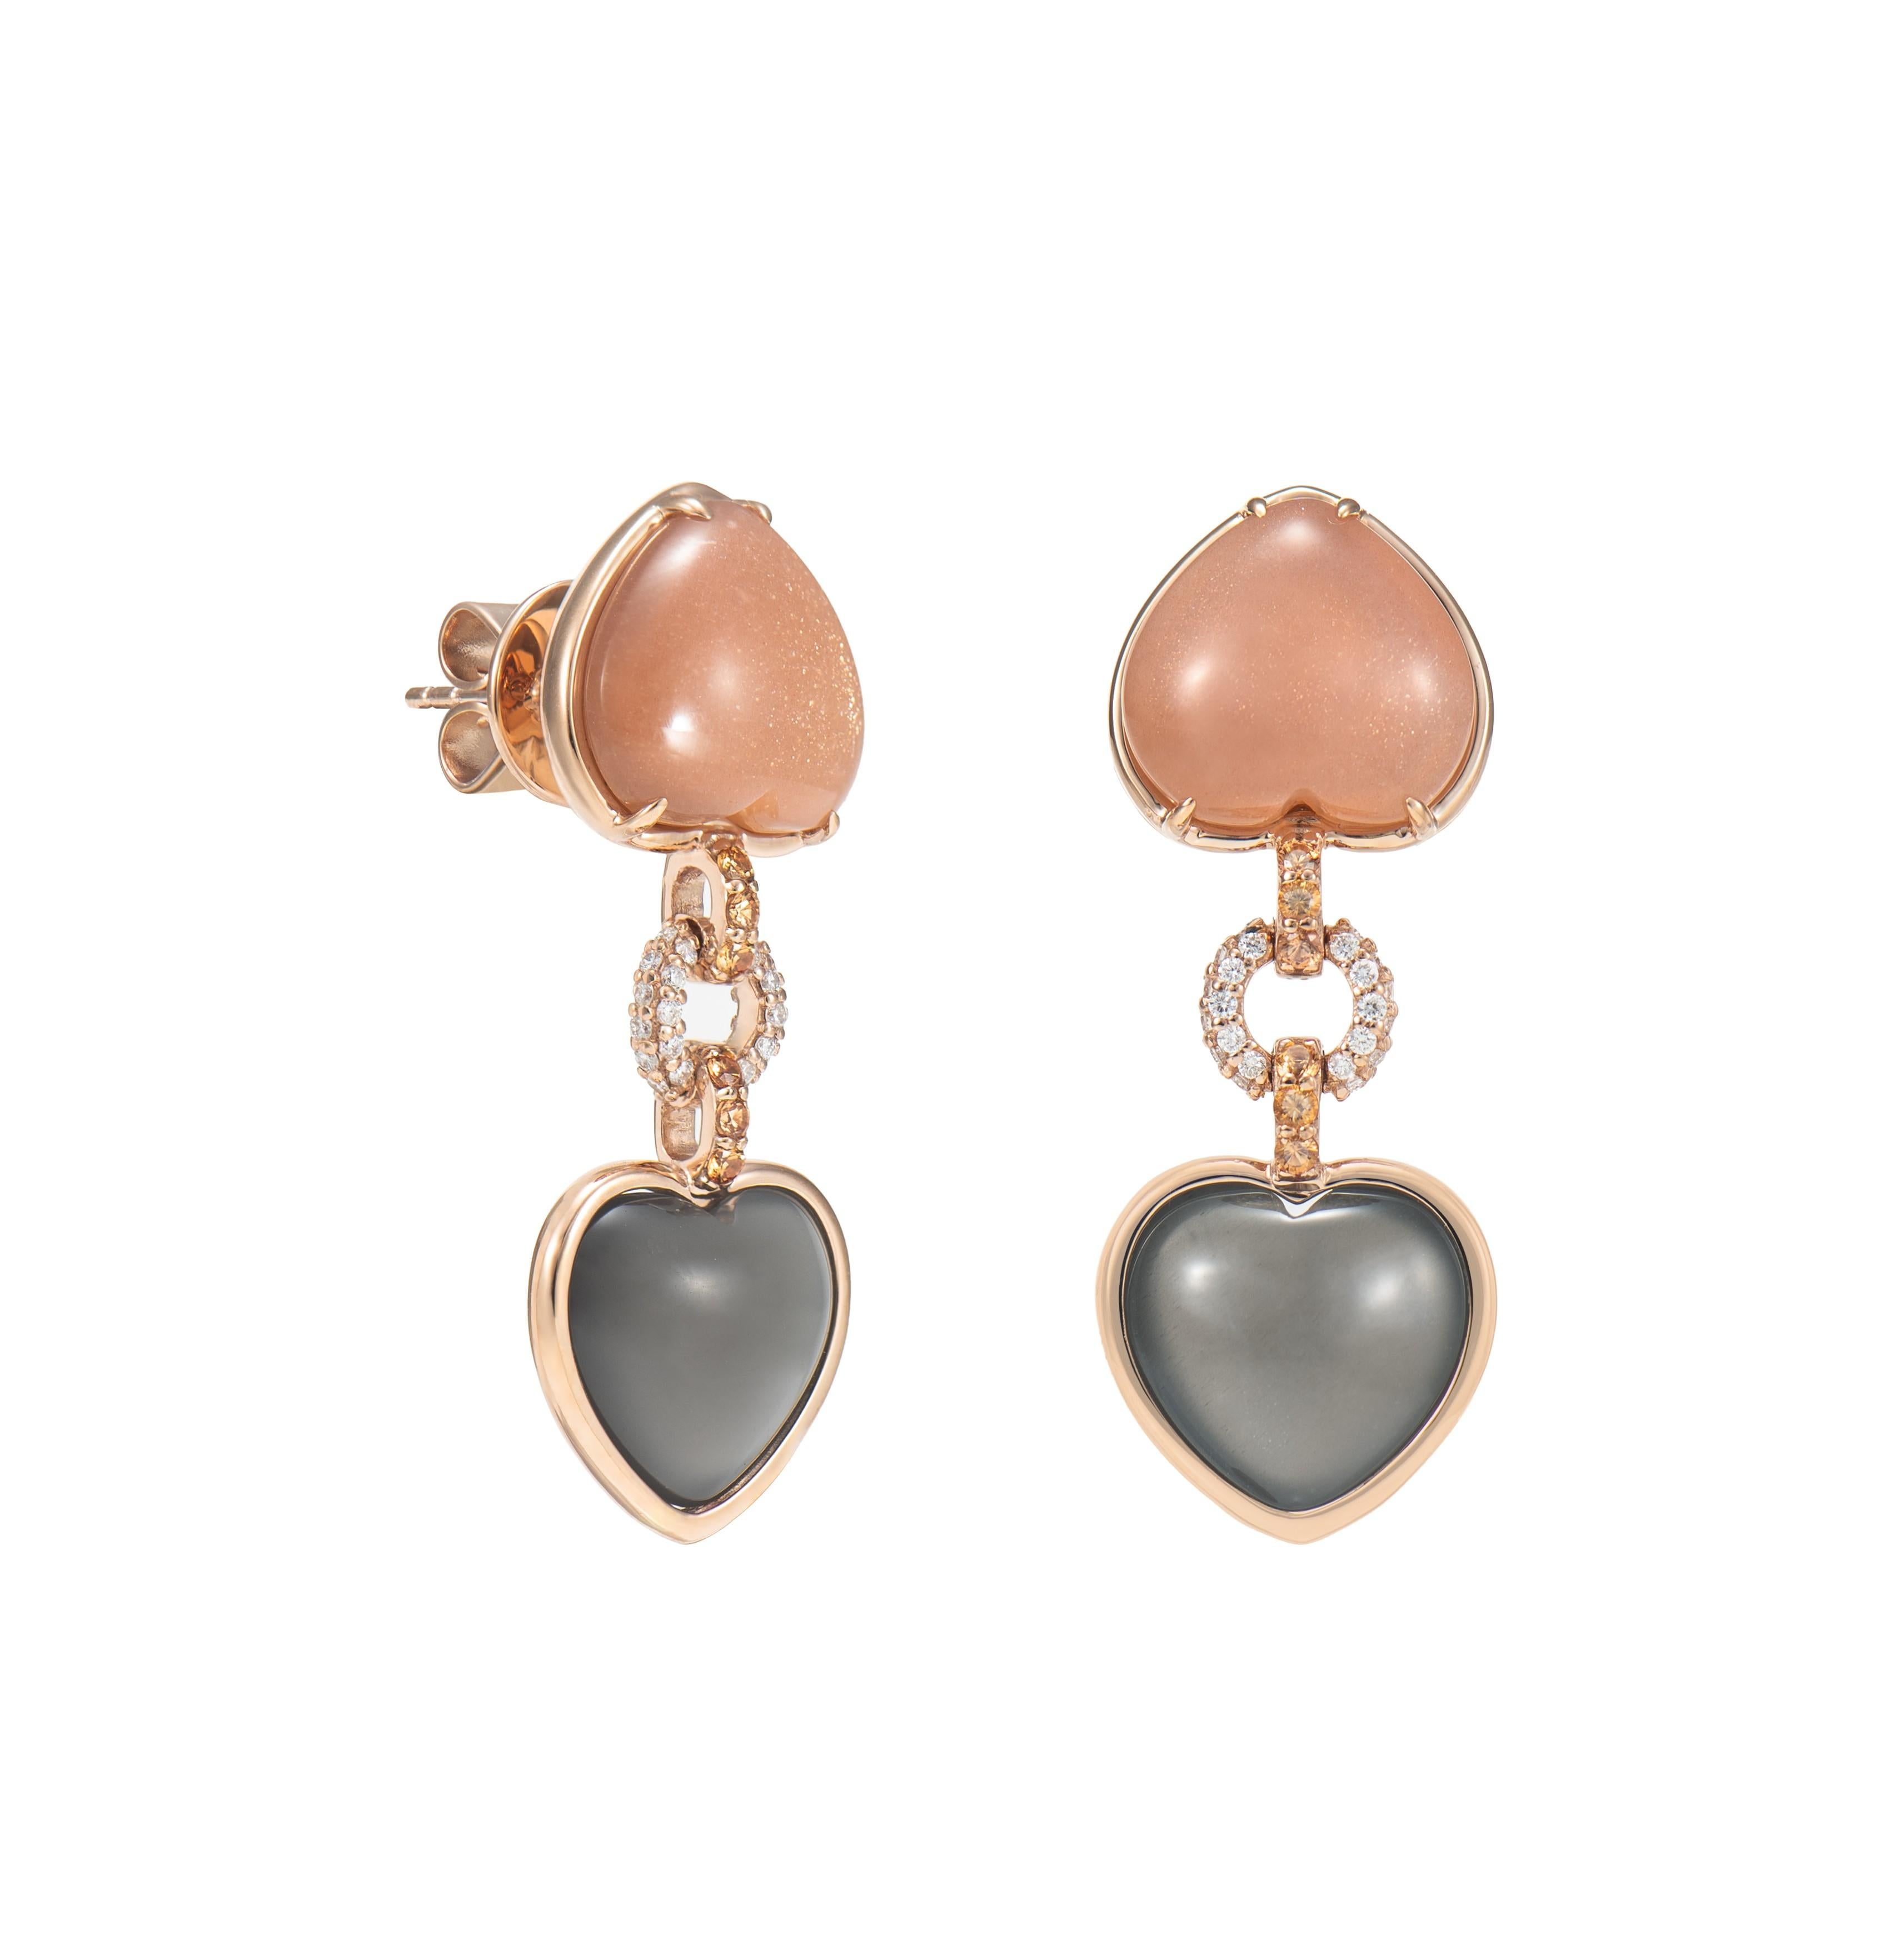 Celebrating the season of love with these delicate heart jewels! These pieces showcase beautiful gemstones with dainty accents to elevatue the beauty of the gem. 

Orange Moonstone and Grey Moonstone Drop Earring in 18 Karat Rose Gold with Orange